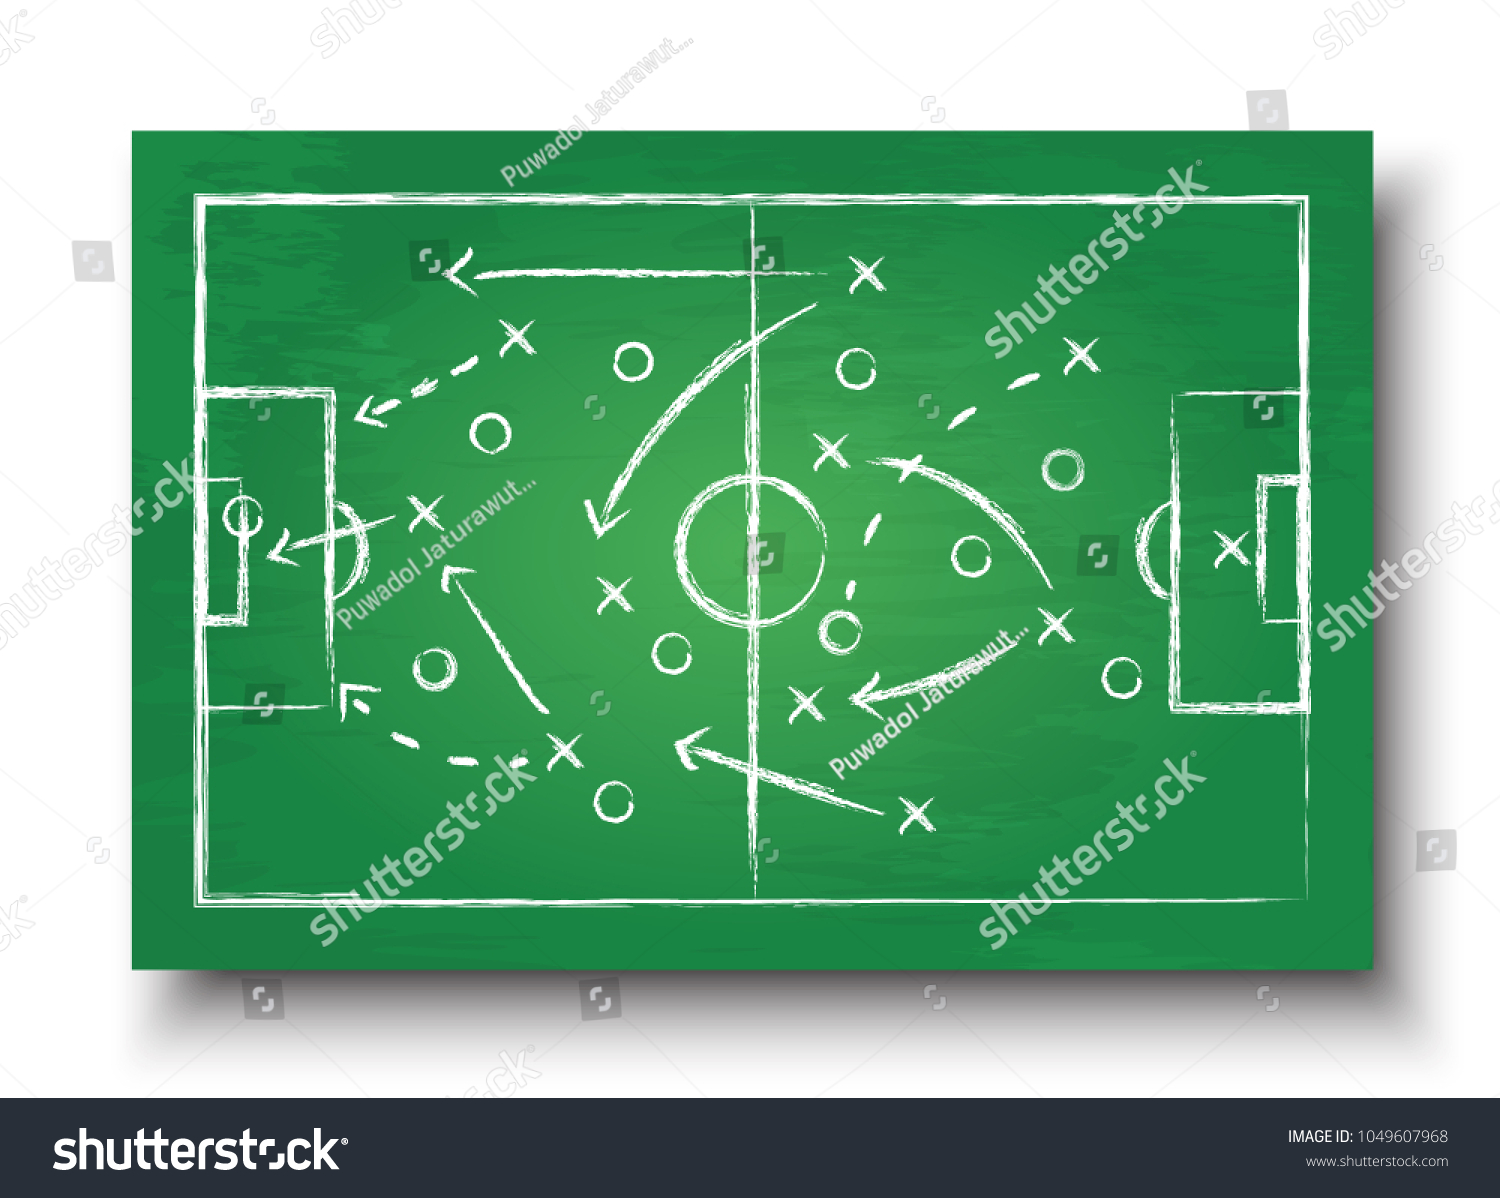 Soccer cup formation and tactic . Greenboard with football game strategy. Vector for international world championship tournament 2018 concept . #1049607968